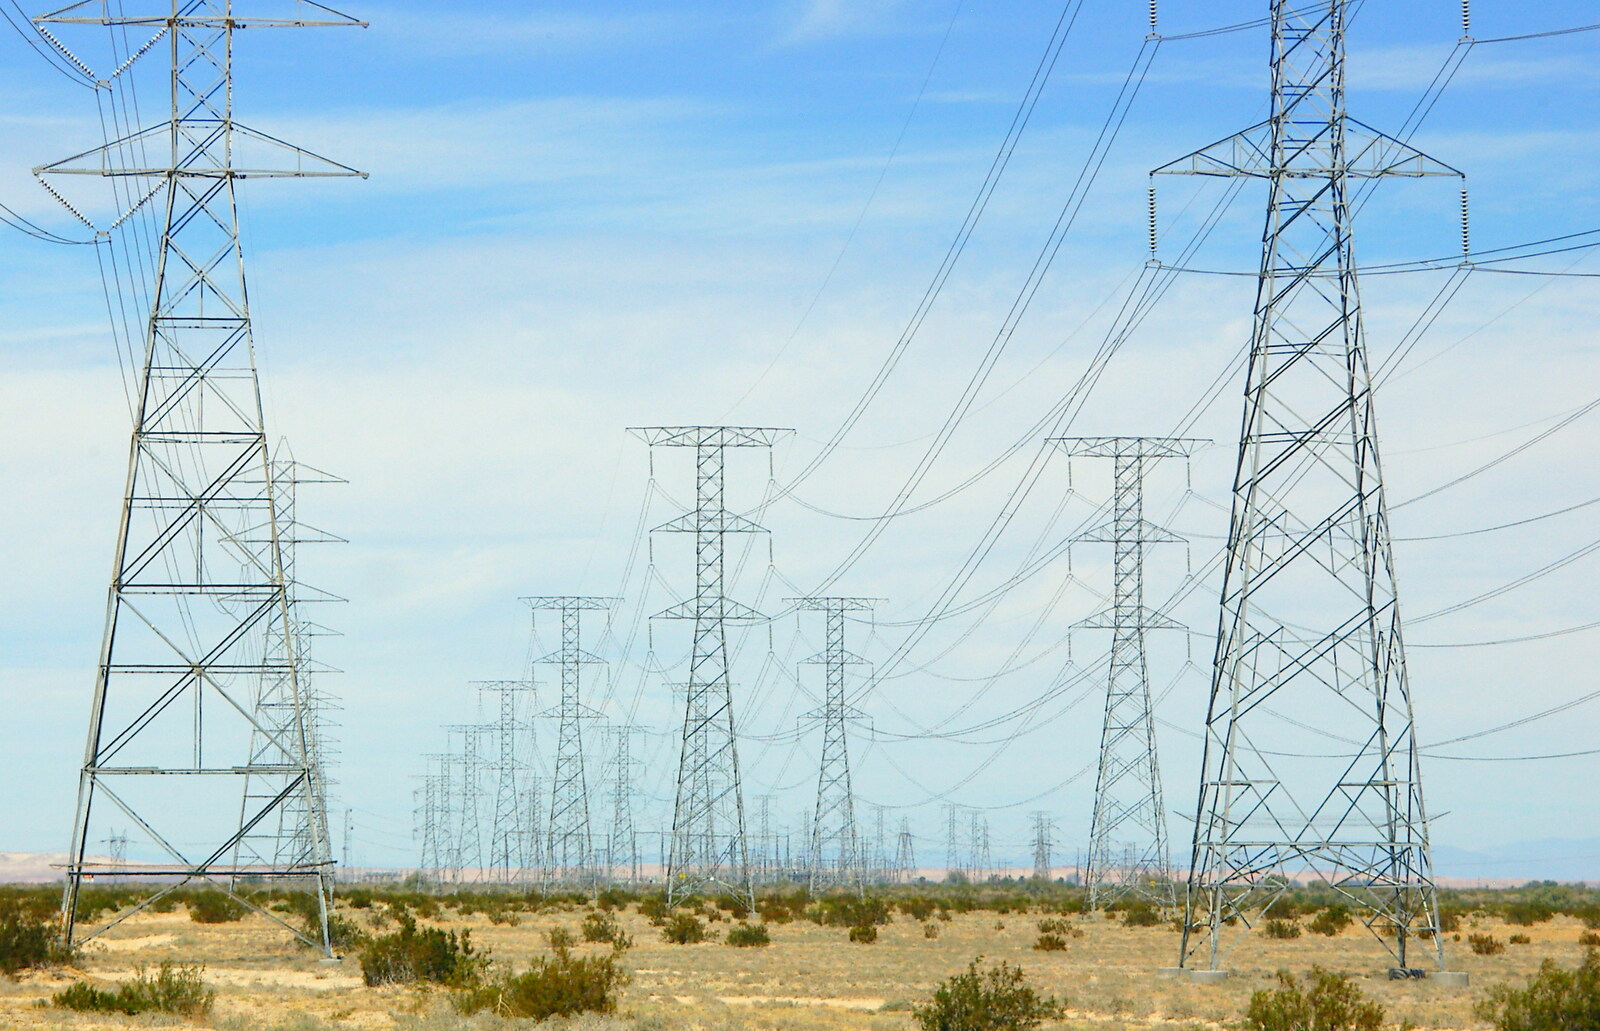 Massed electricity pylons on Route 98 from California Desert: El Centro, Imperial Valley, California, US - 24th September 2005